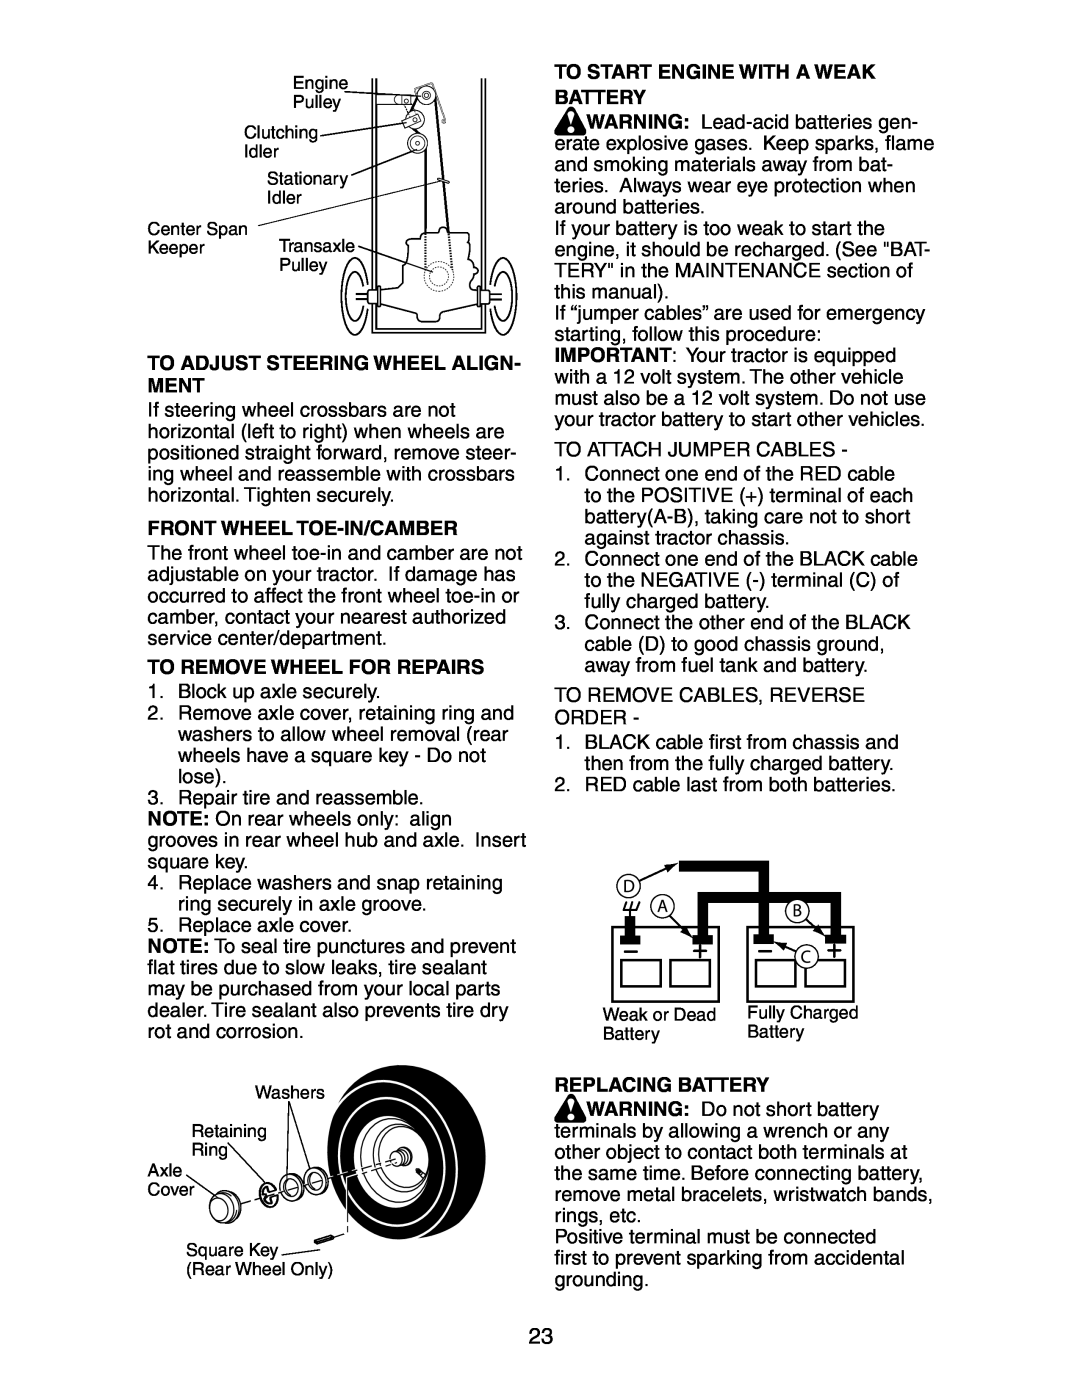 Poulan 271150 manual To Adjust Steering Wheel Align- Ment, Front Wheel Toe-In/Camber, To Remove Wheel For Repairs 